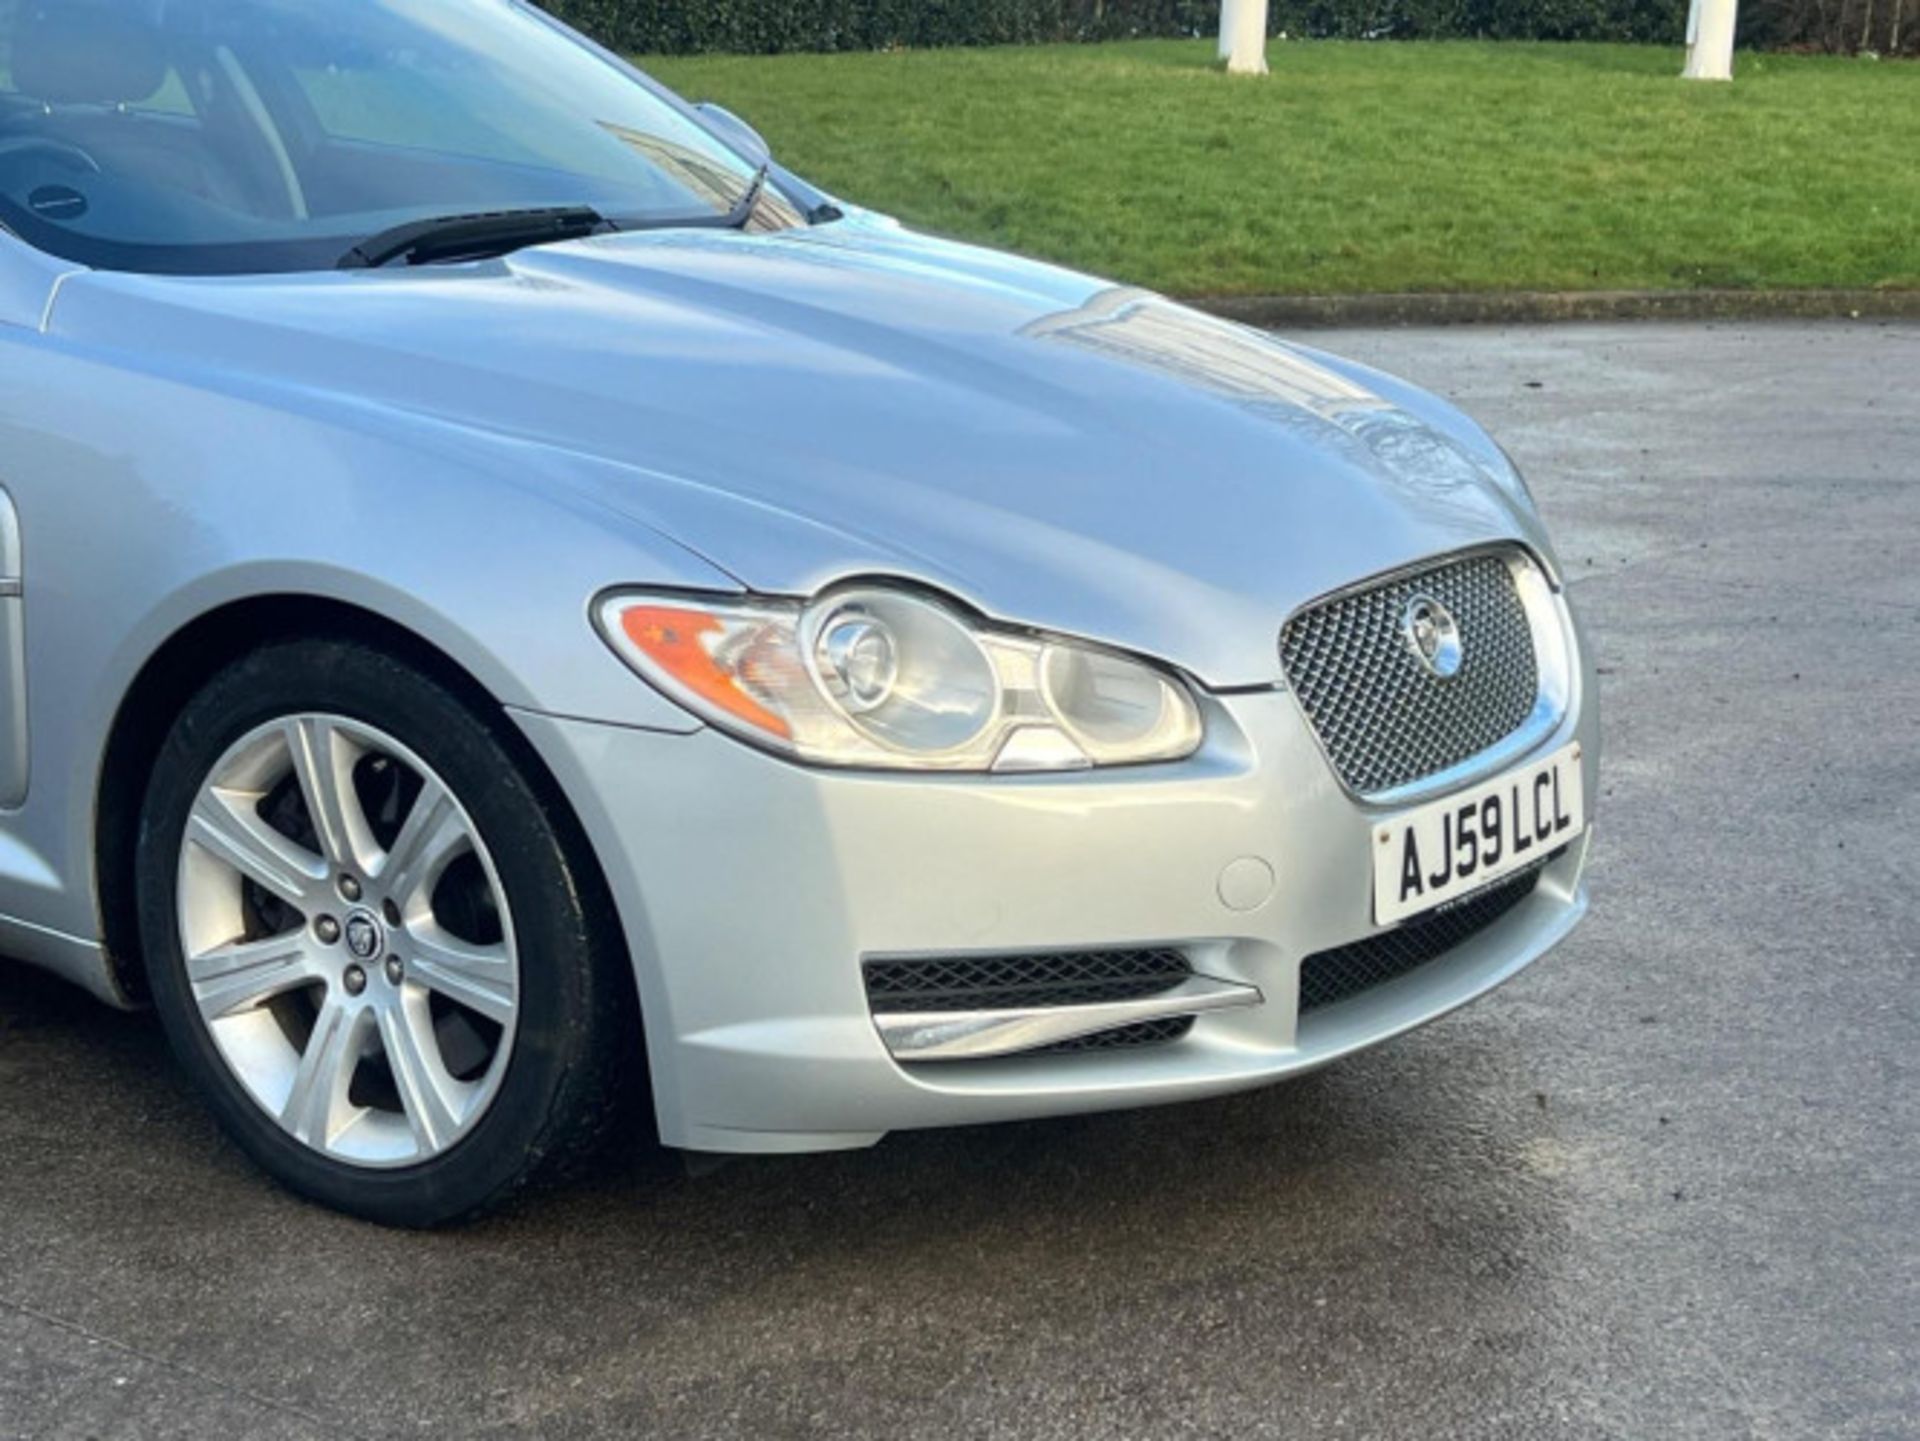 LUXURIOUS JAGUAR XF 3.0D V6 LUXURY 4DR AUTOMATIC SALOON >>--NO VAT ON HAMMER--<< - Image 106 of 118